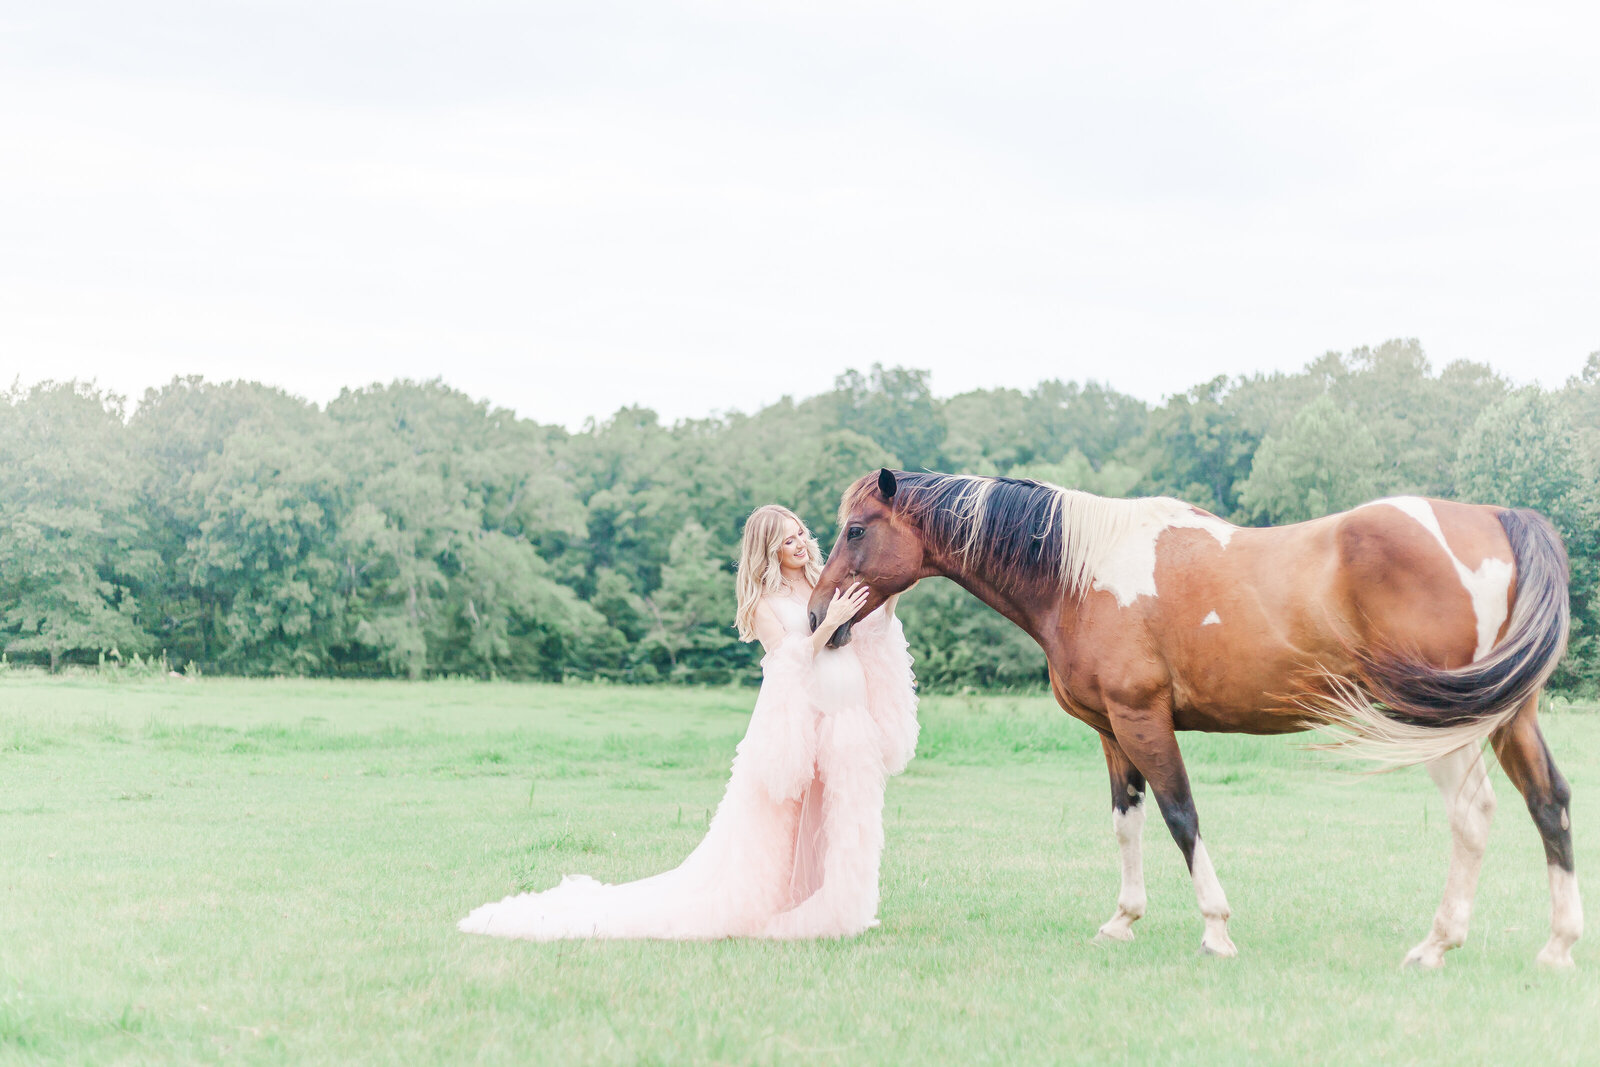 Pregnant woman wearing light pink dress petting horses nose in field during maternity session with 5U Photography in Birmingham, AL